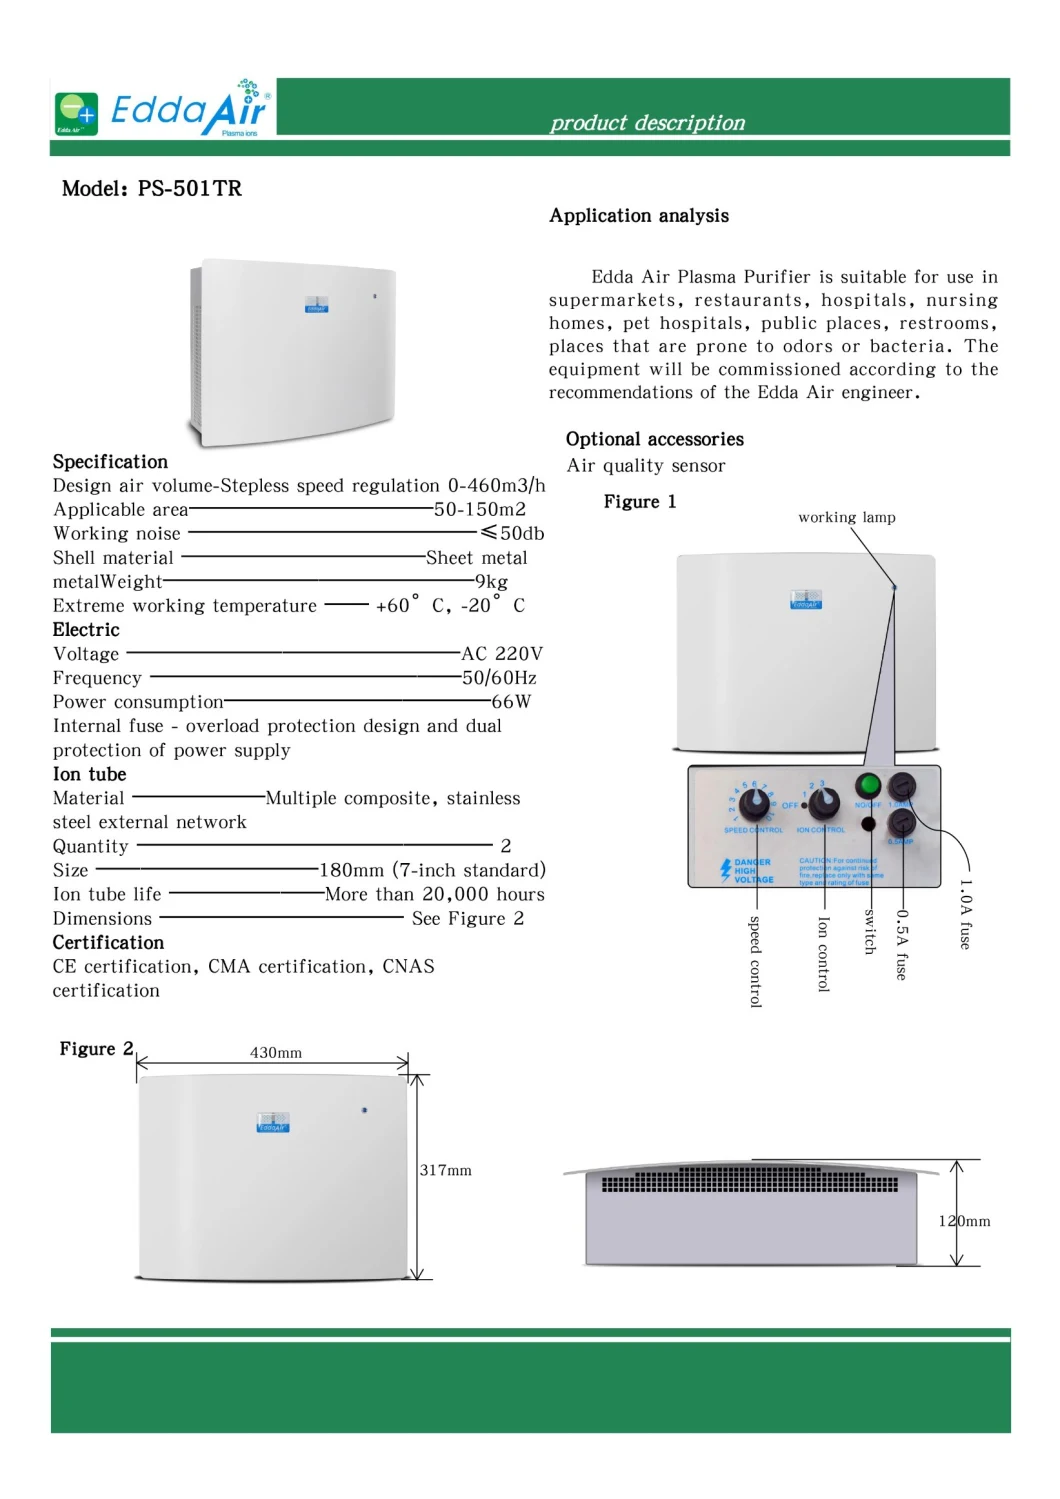 Wall-Mounted Air Purifier Air Conditioner Air Filter Air Purification System Plasma Air Cleaner